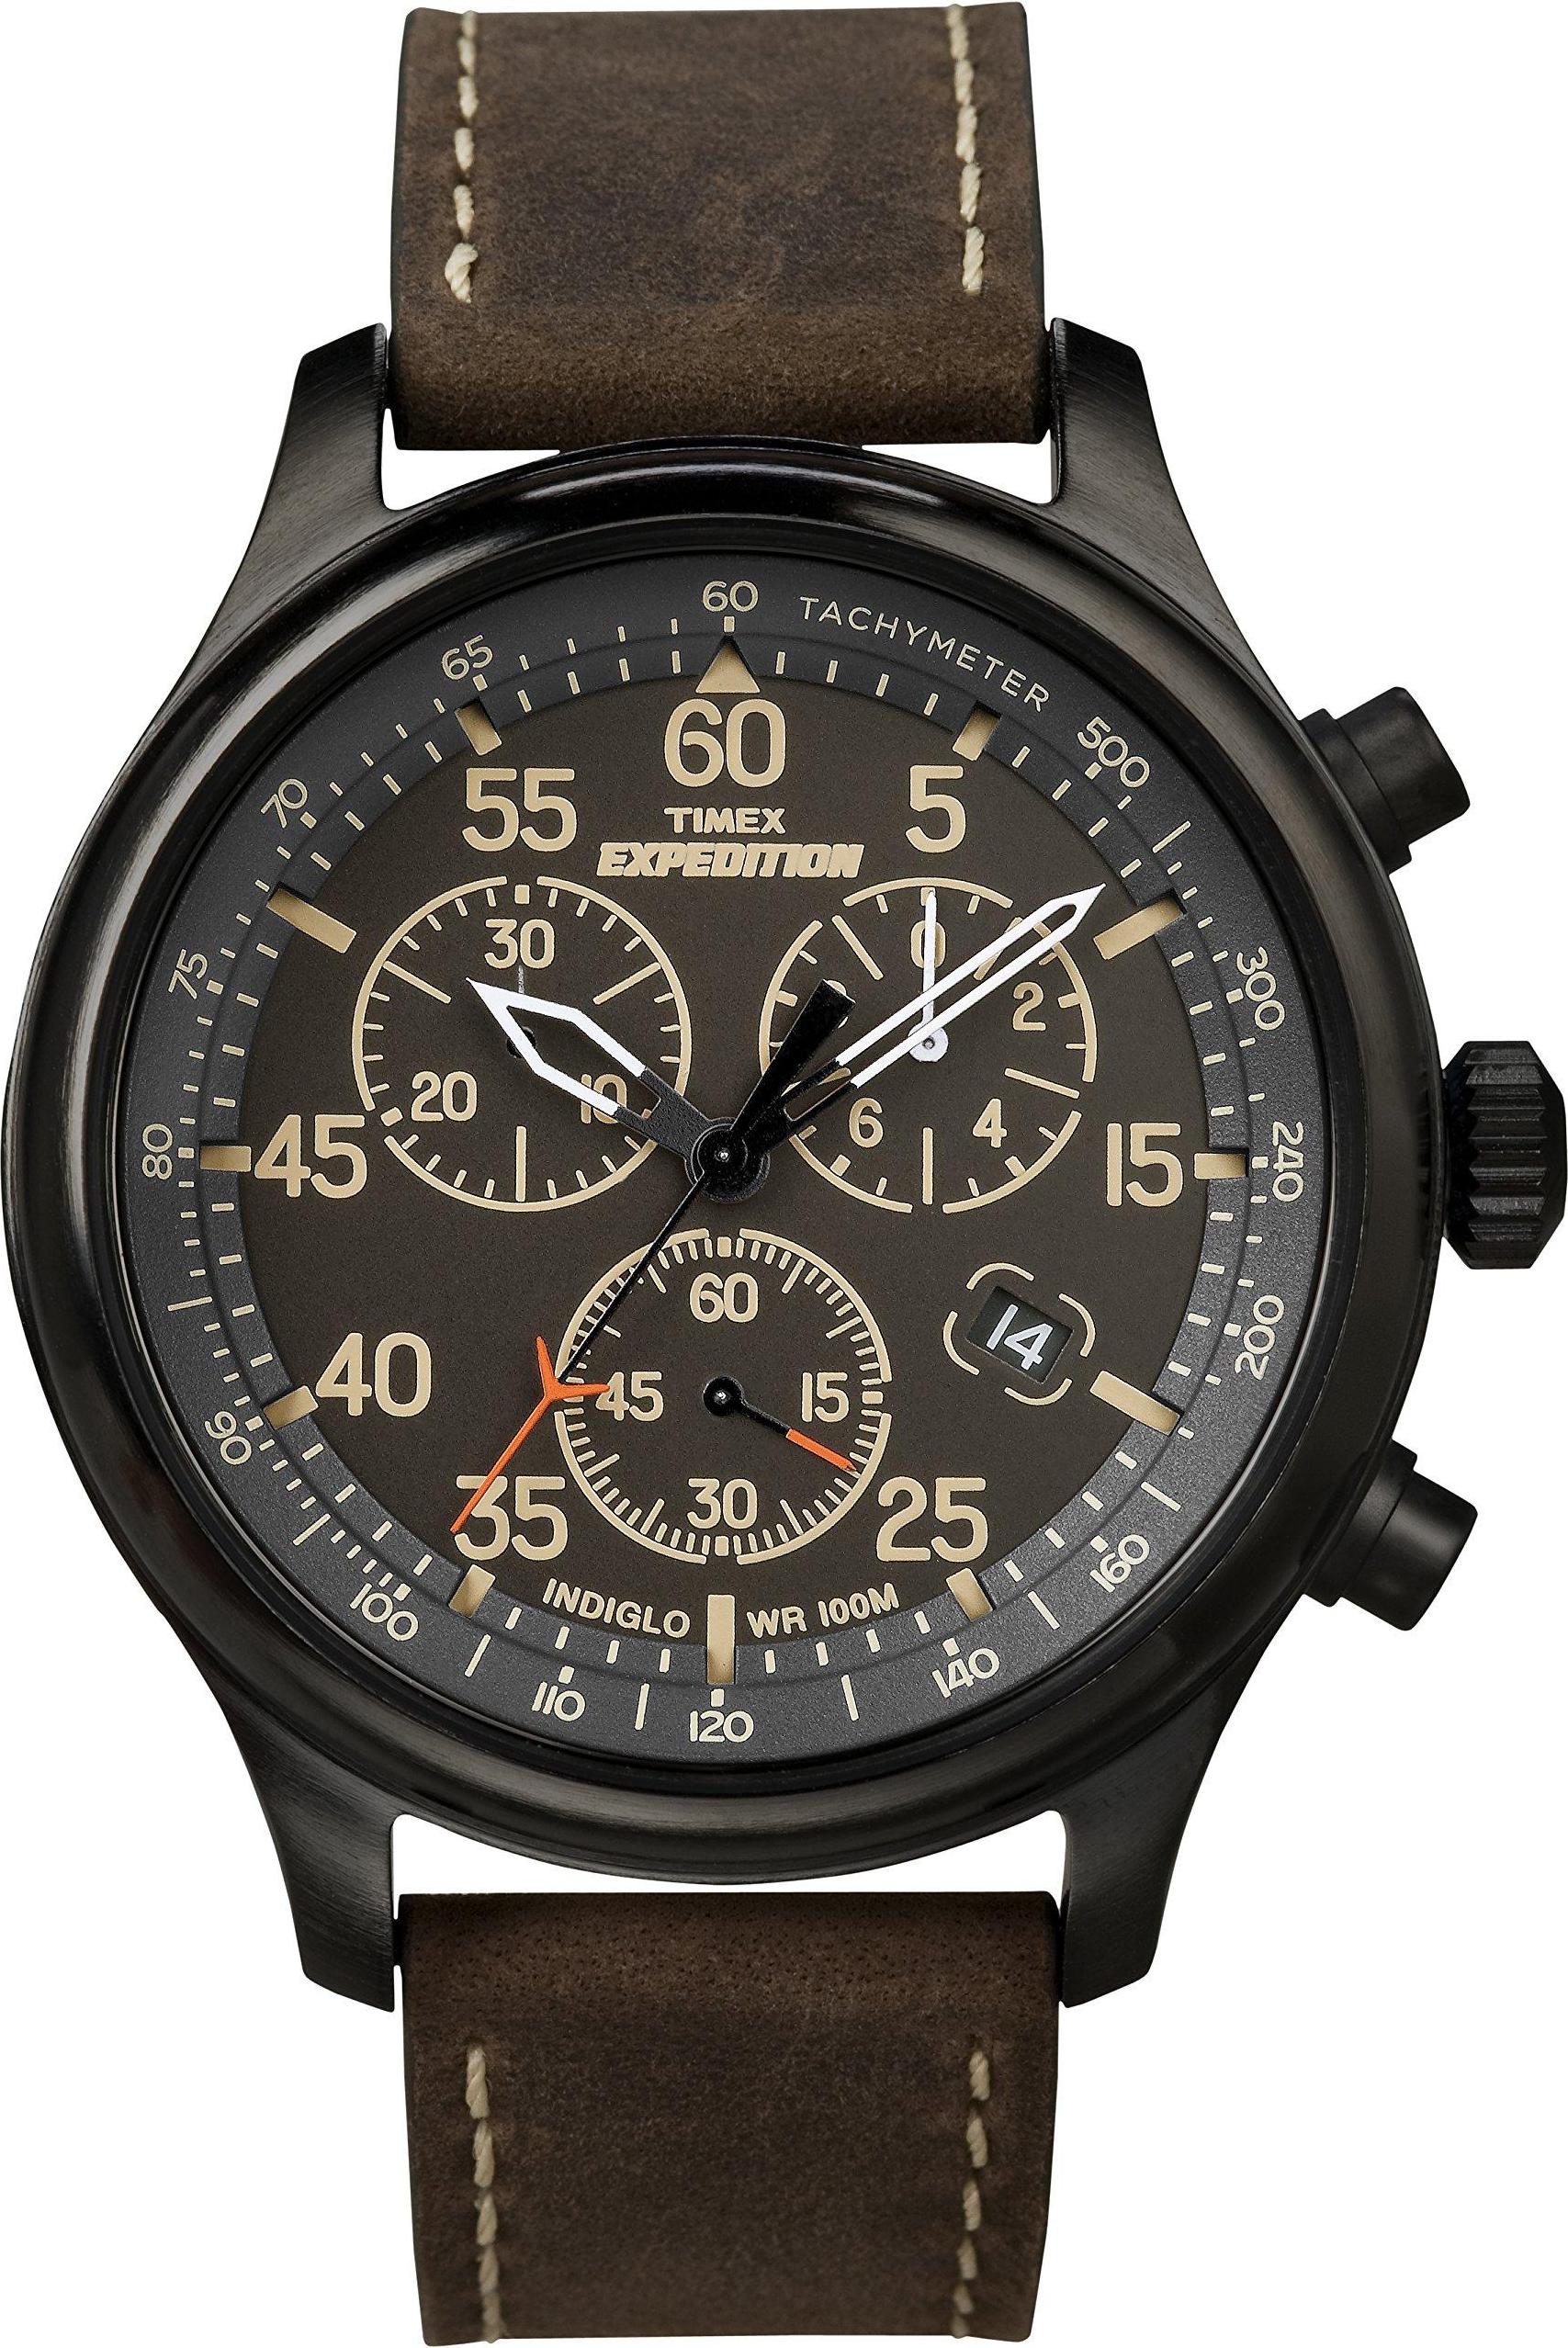 Top 31+ imagen timex expedition chronograph